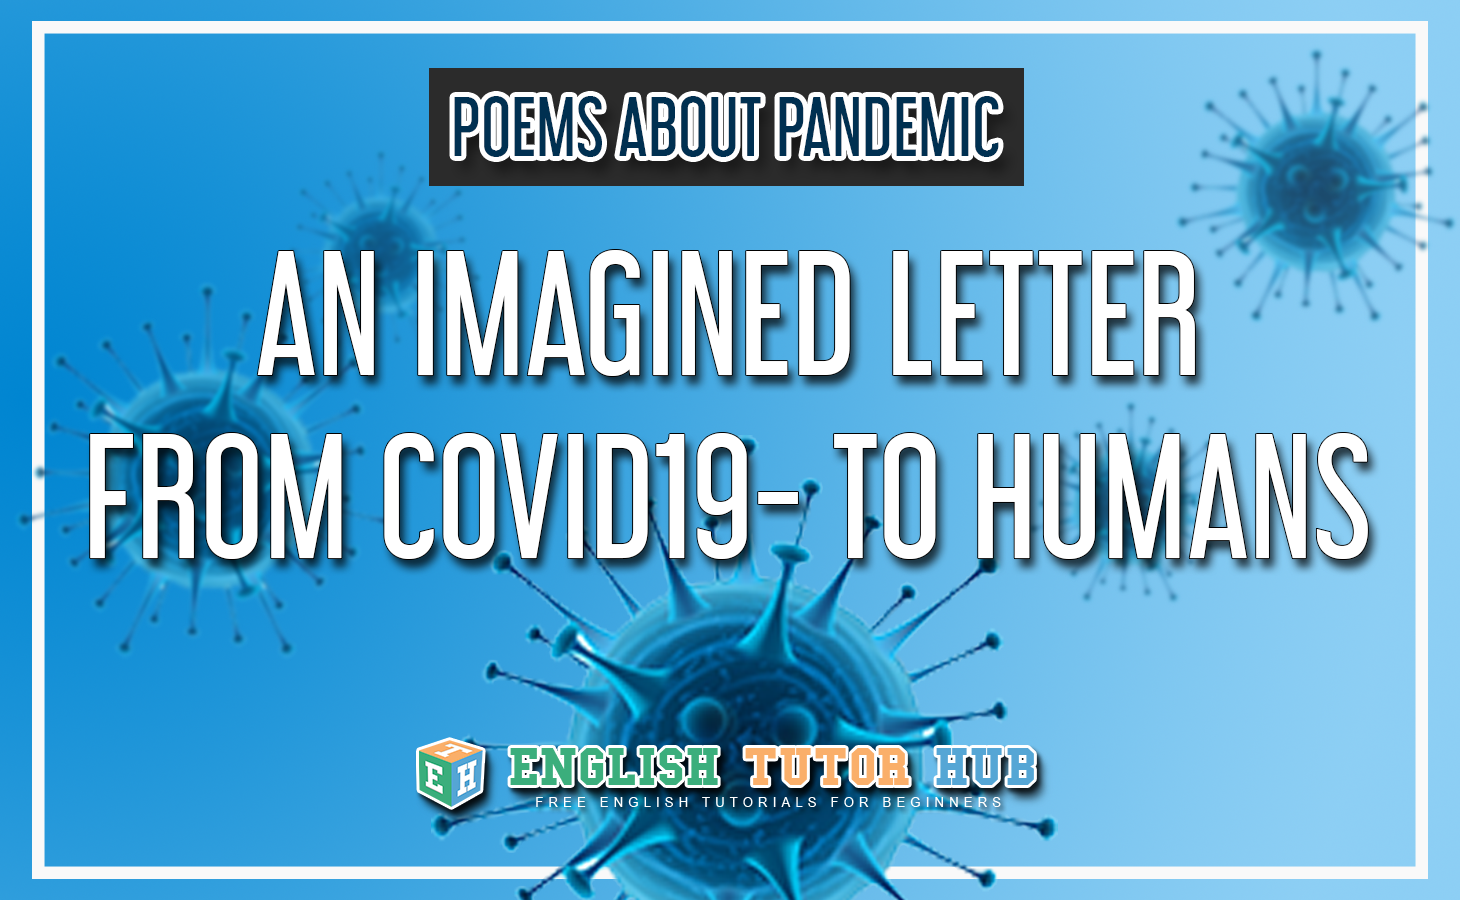 Poems About Pandemic - An Imagined Letter from Covid19 to humans